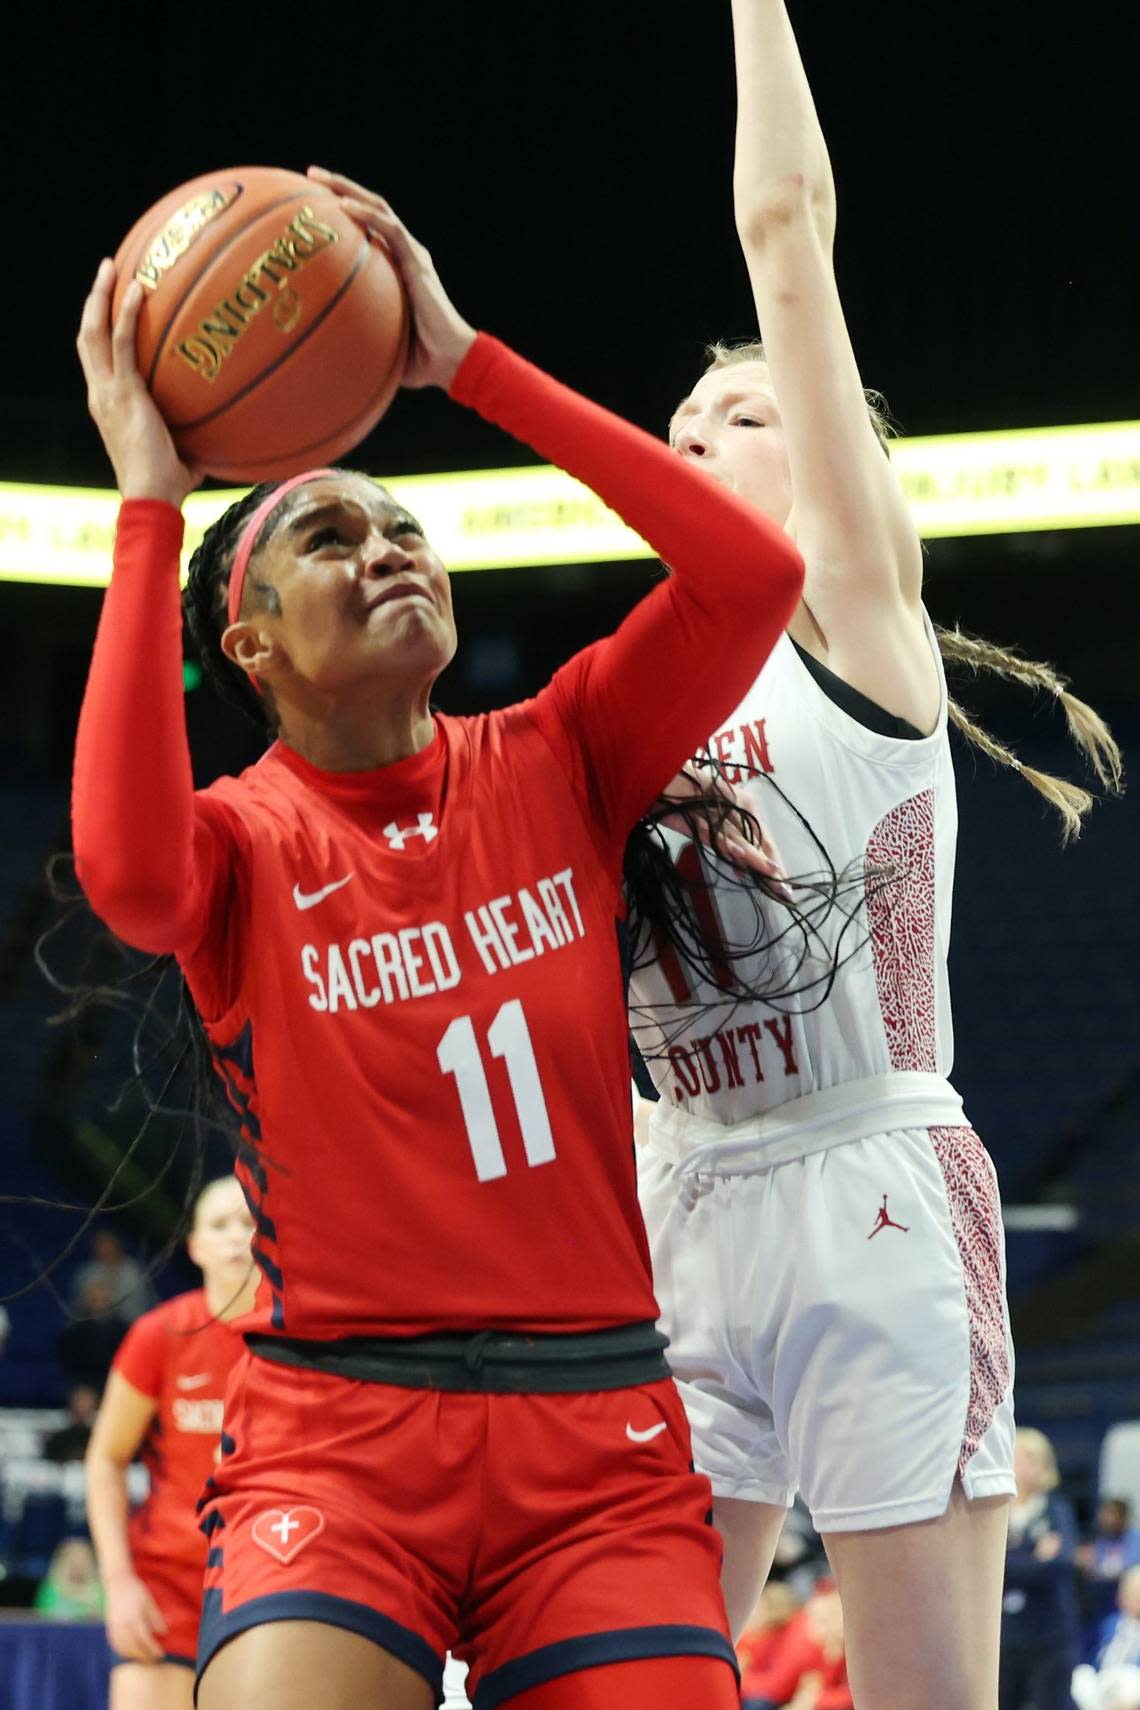 ZaKiyah Johnson (11) helped lead Sacred Heart Academy to its fourth consecutive Kentucky high school basketball state championship in Rupp Arena last month.